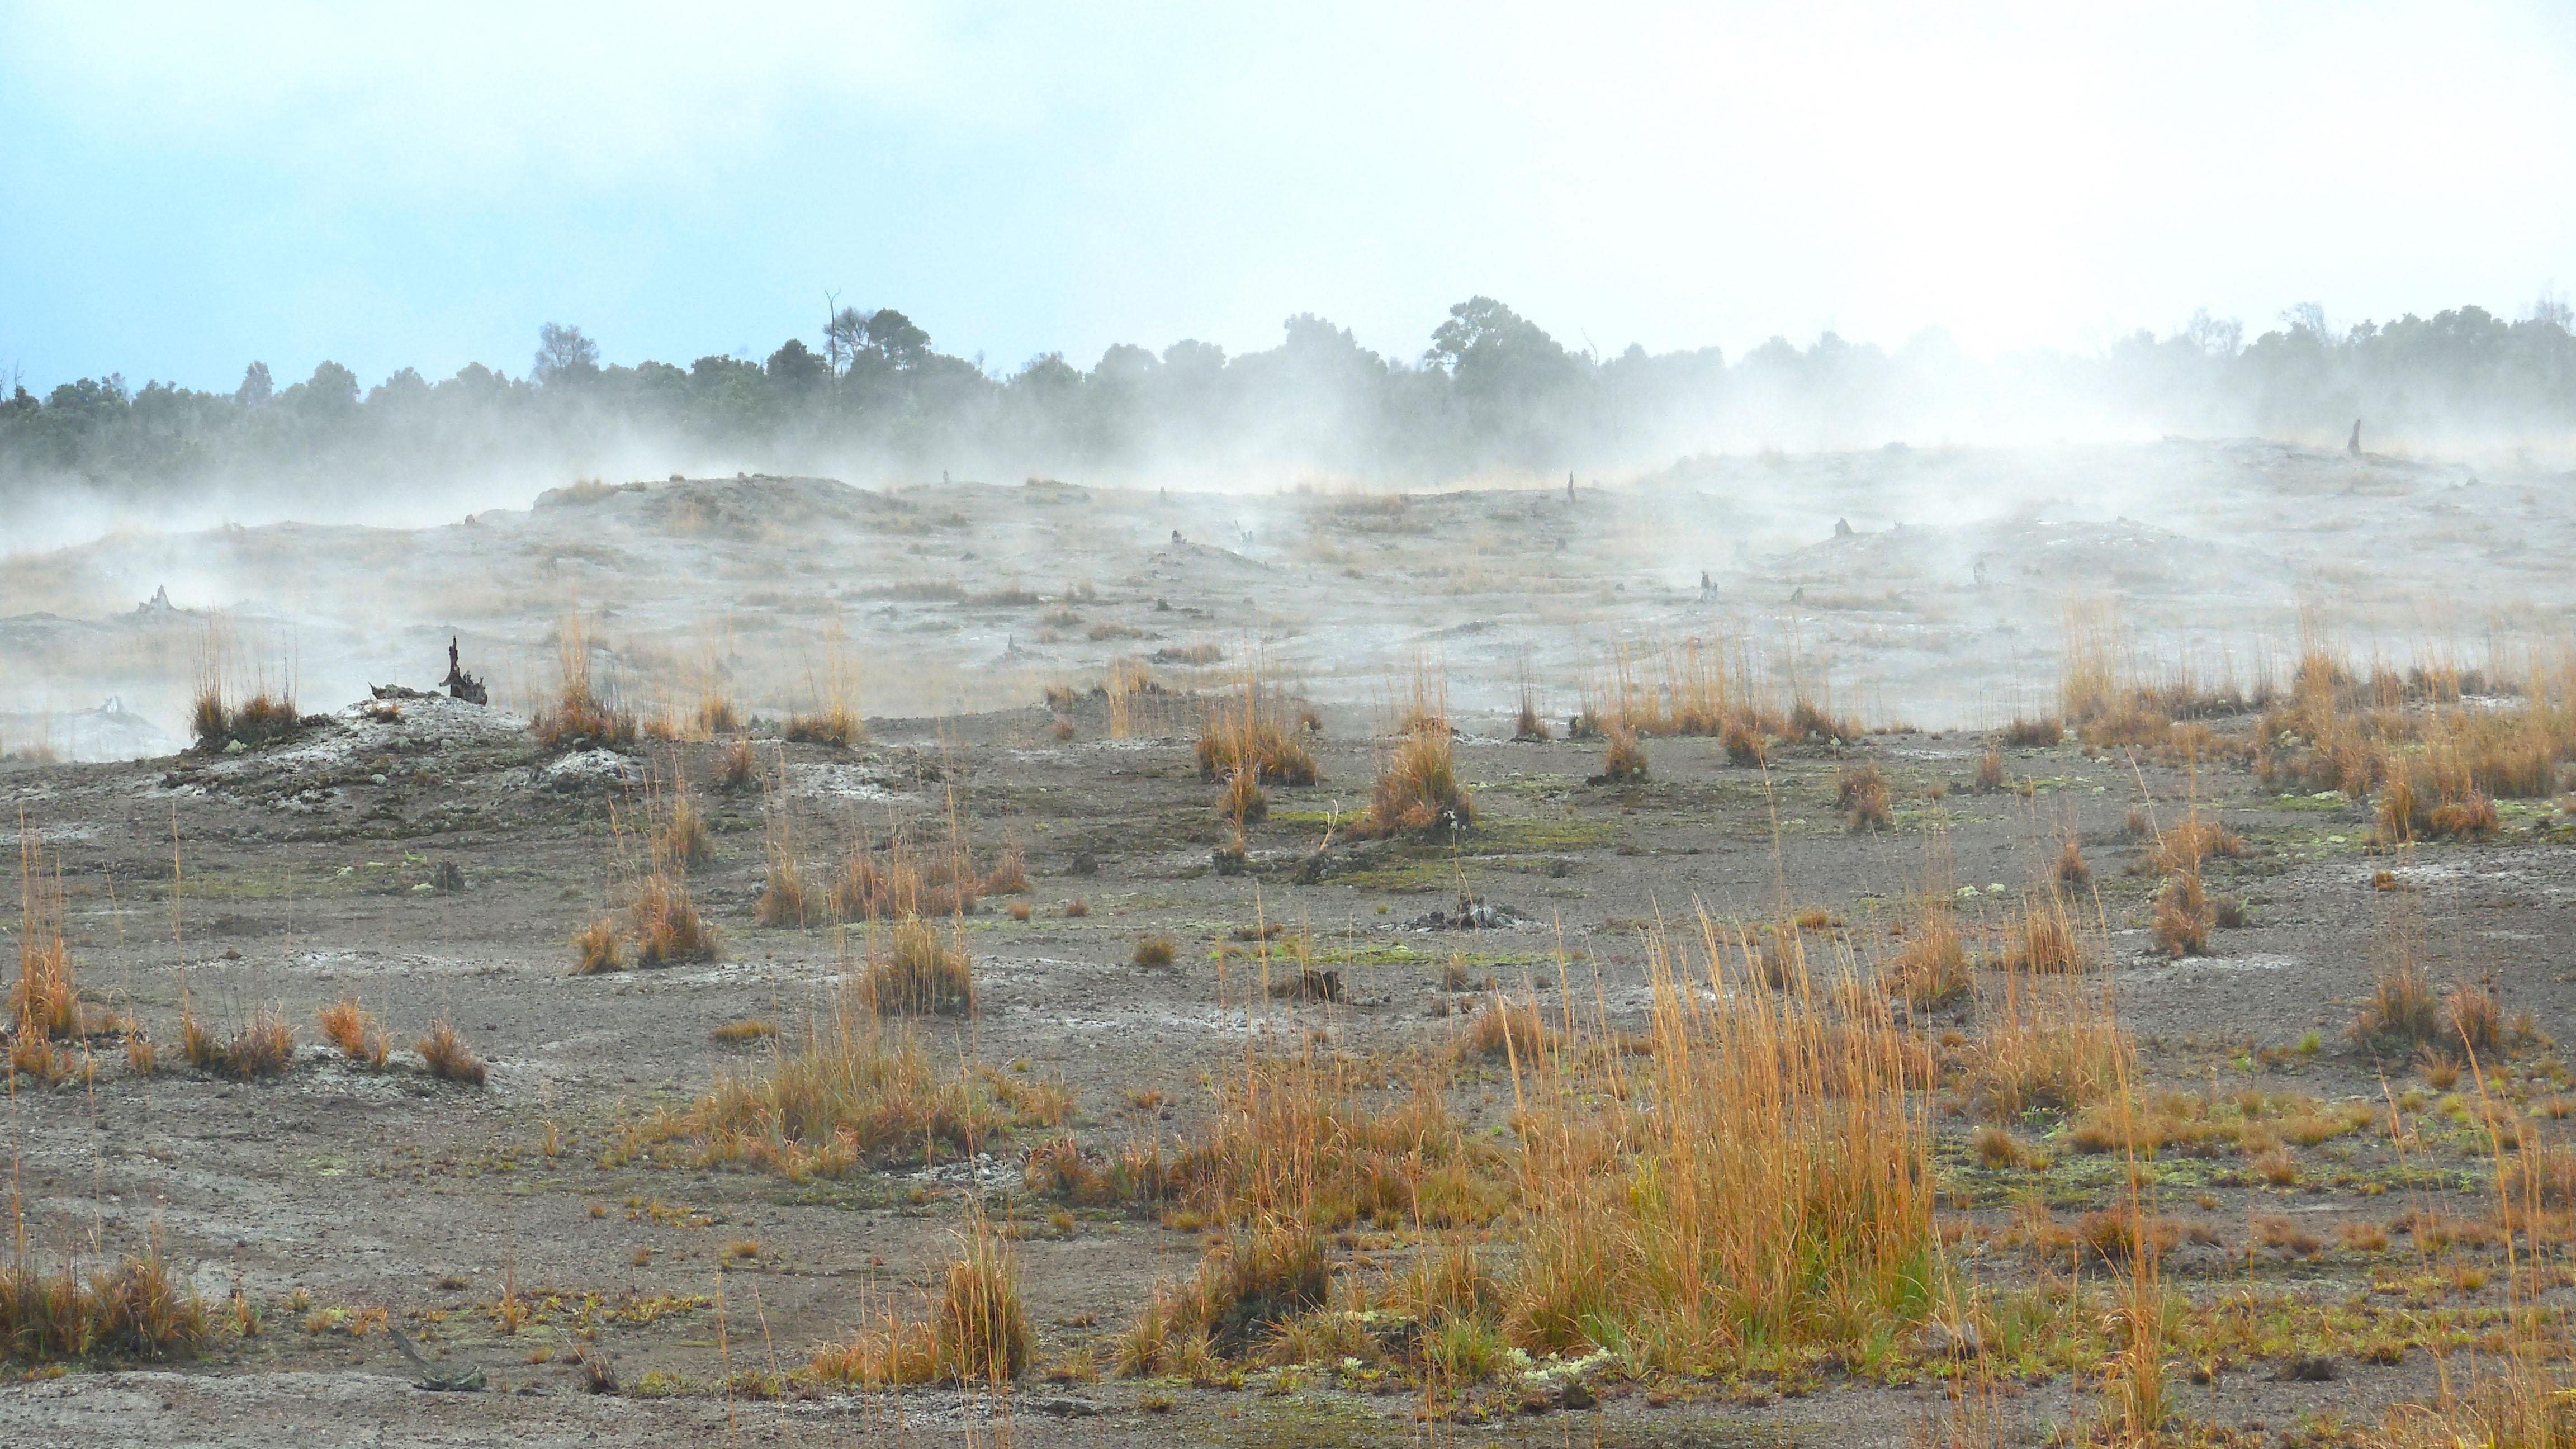 The Earth Microbiome Project aims to catalog all of the world’s microbial communities, including those found in the Puhimau Thermal Area of Hawai’i Volcanoes National Park. (G.M. King)